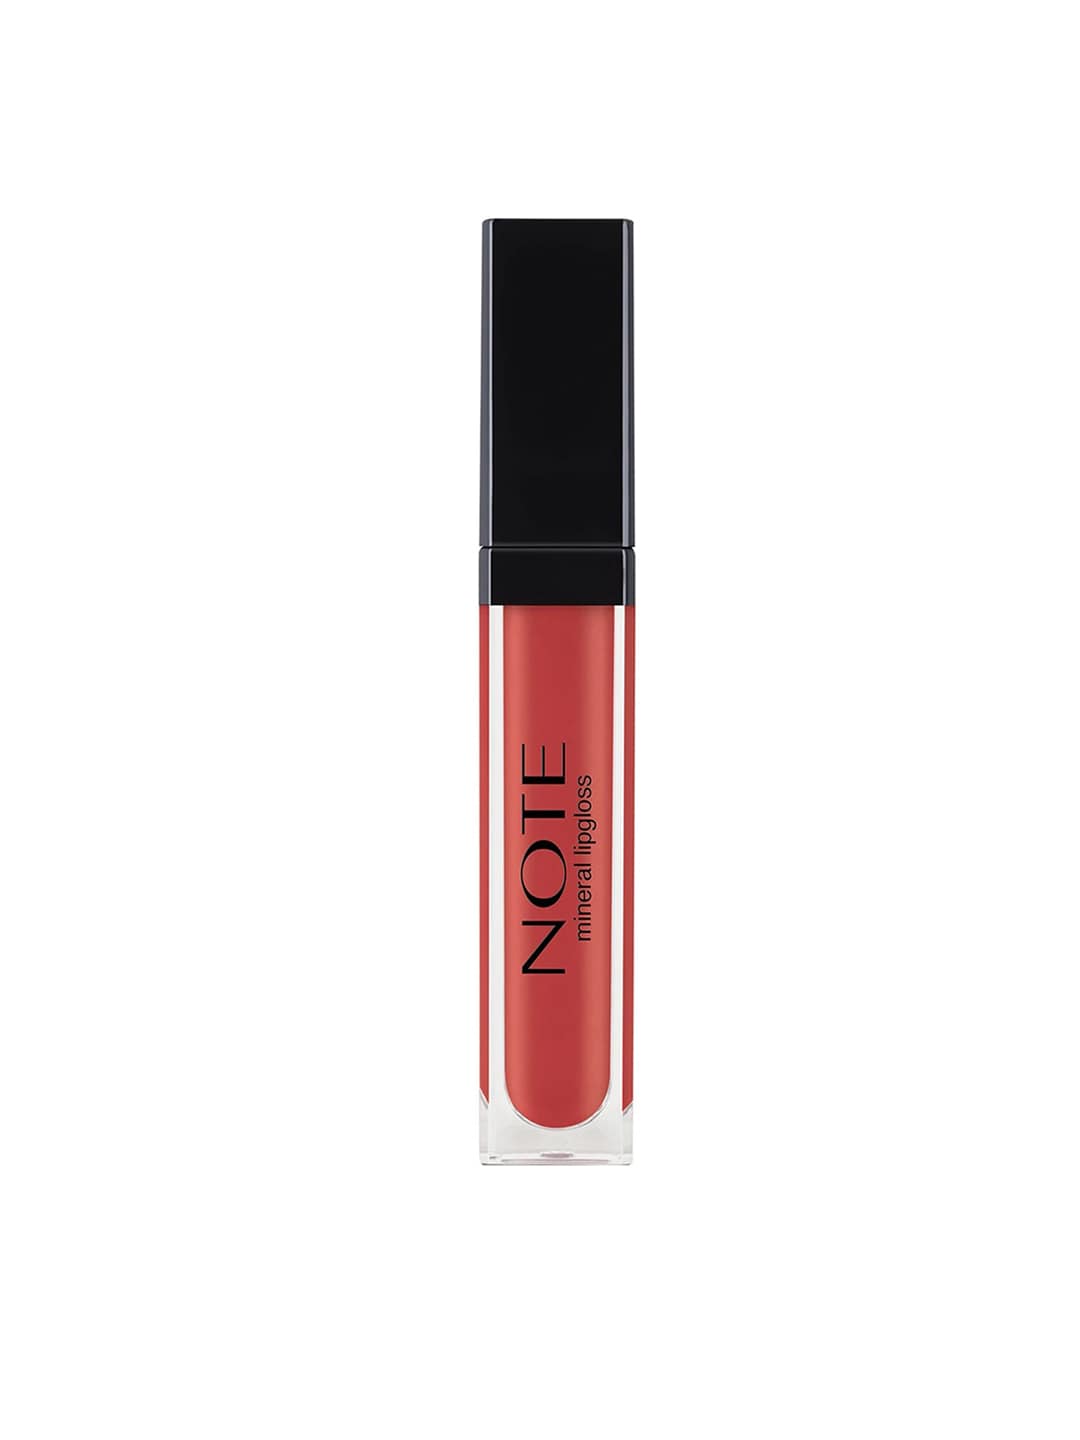 Note Mineral Lipgloss - 02 Blondie Pink, 6ml Price in India